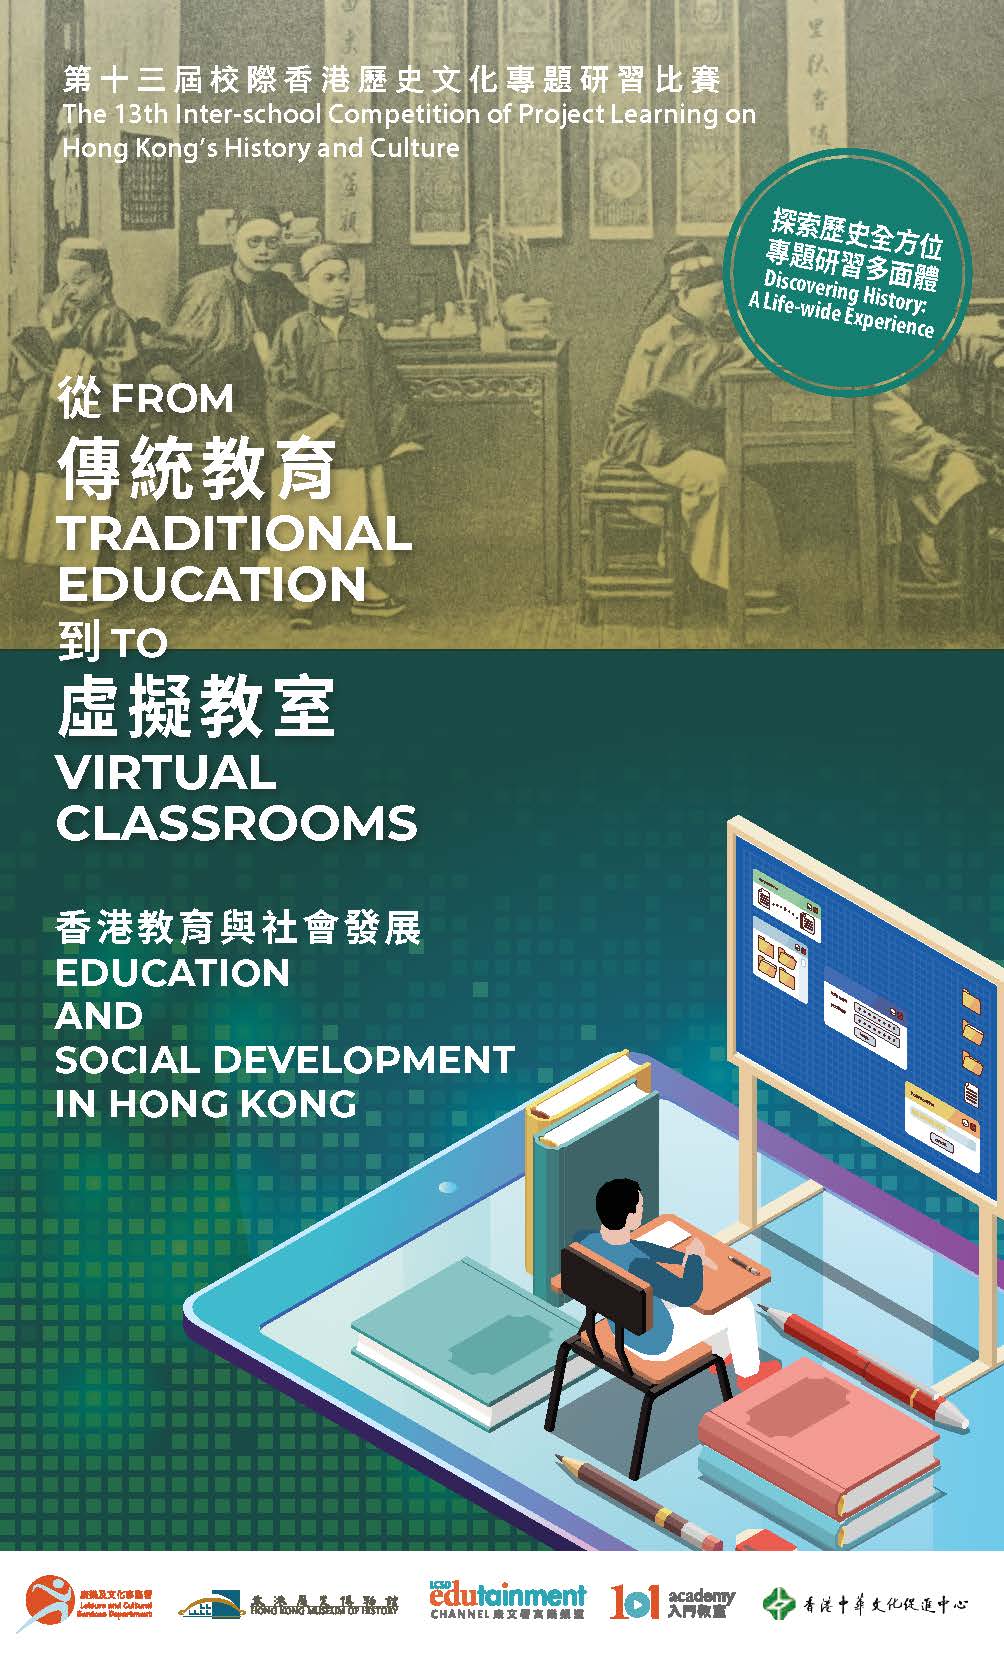 The 13th Inter-school Competition of Project Learning on Hong Kong’s History and Culture